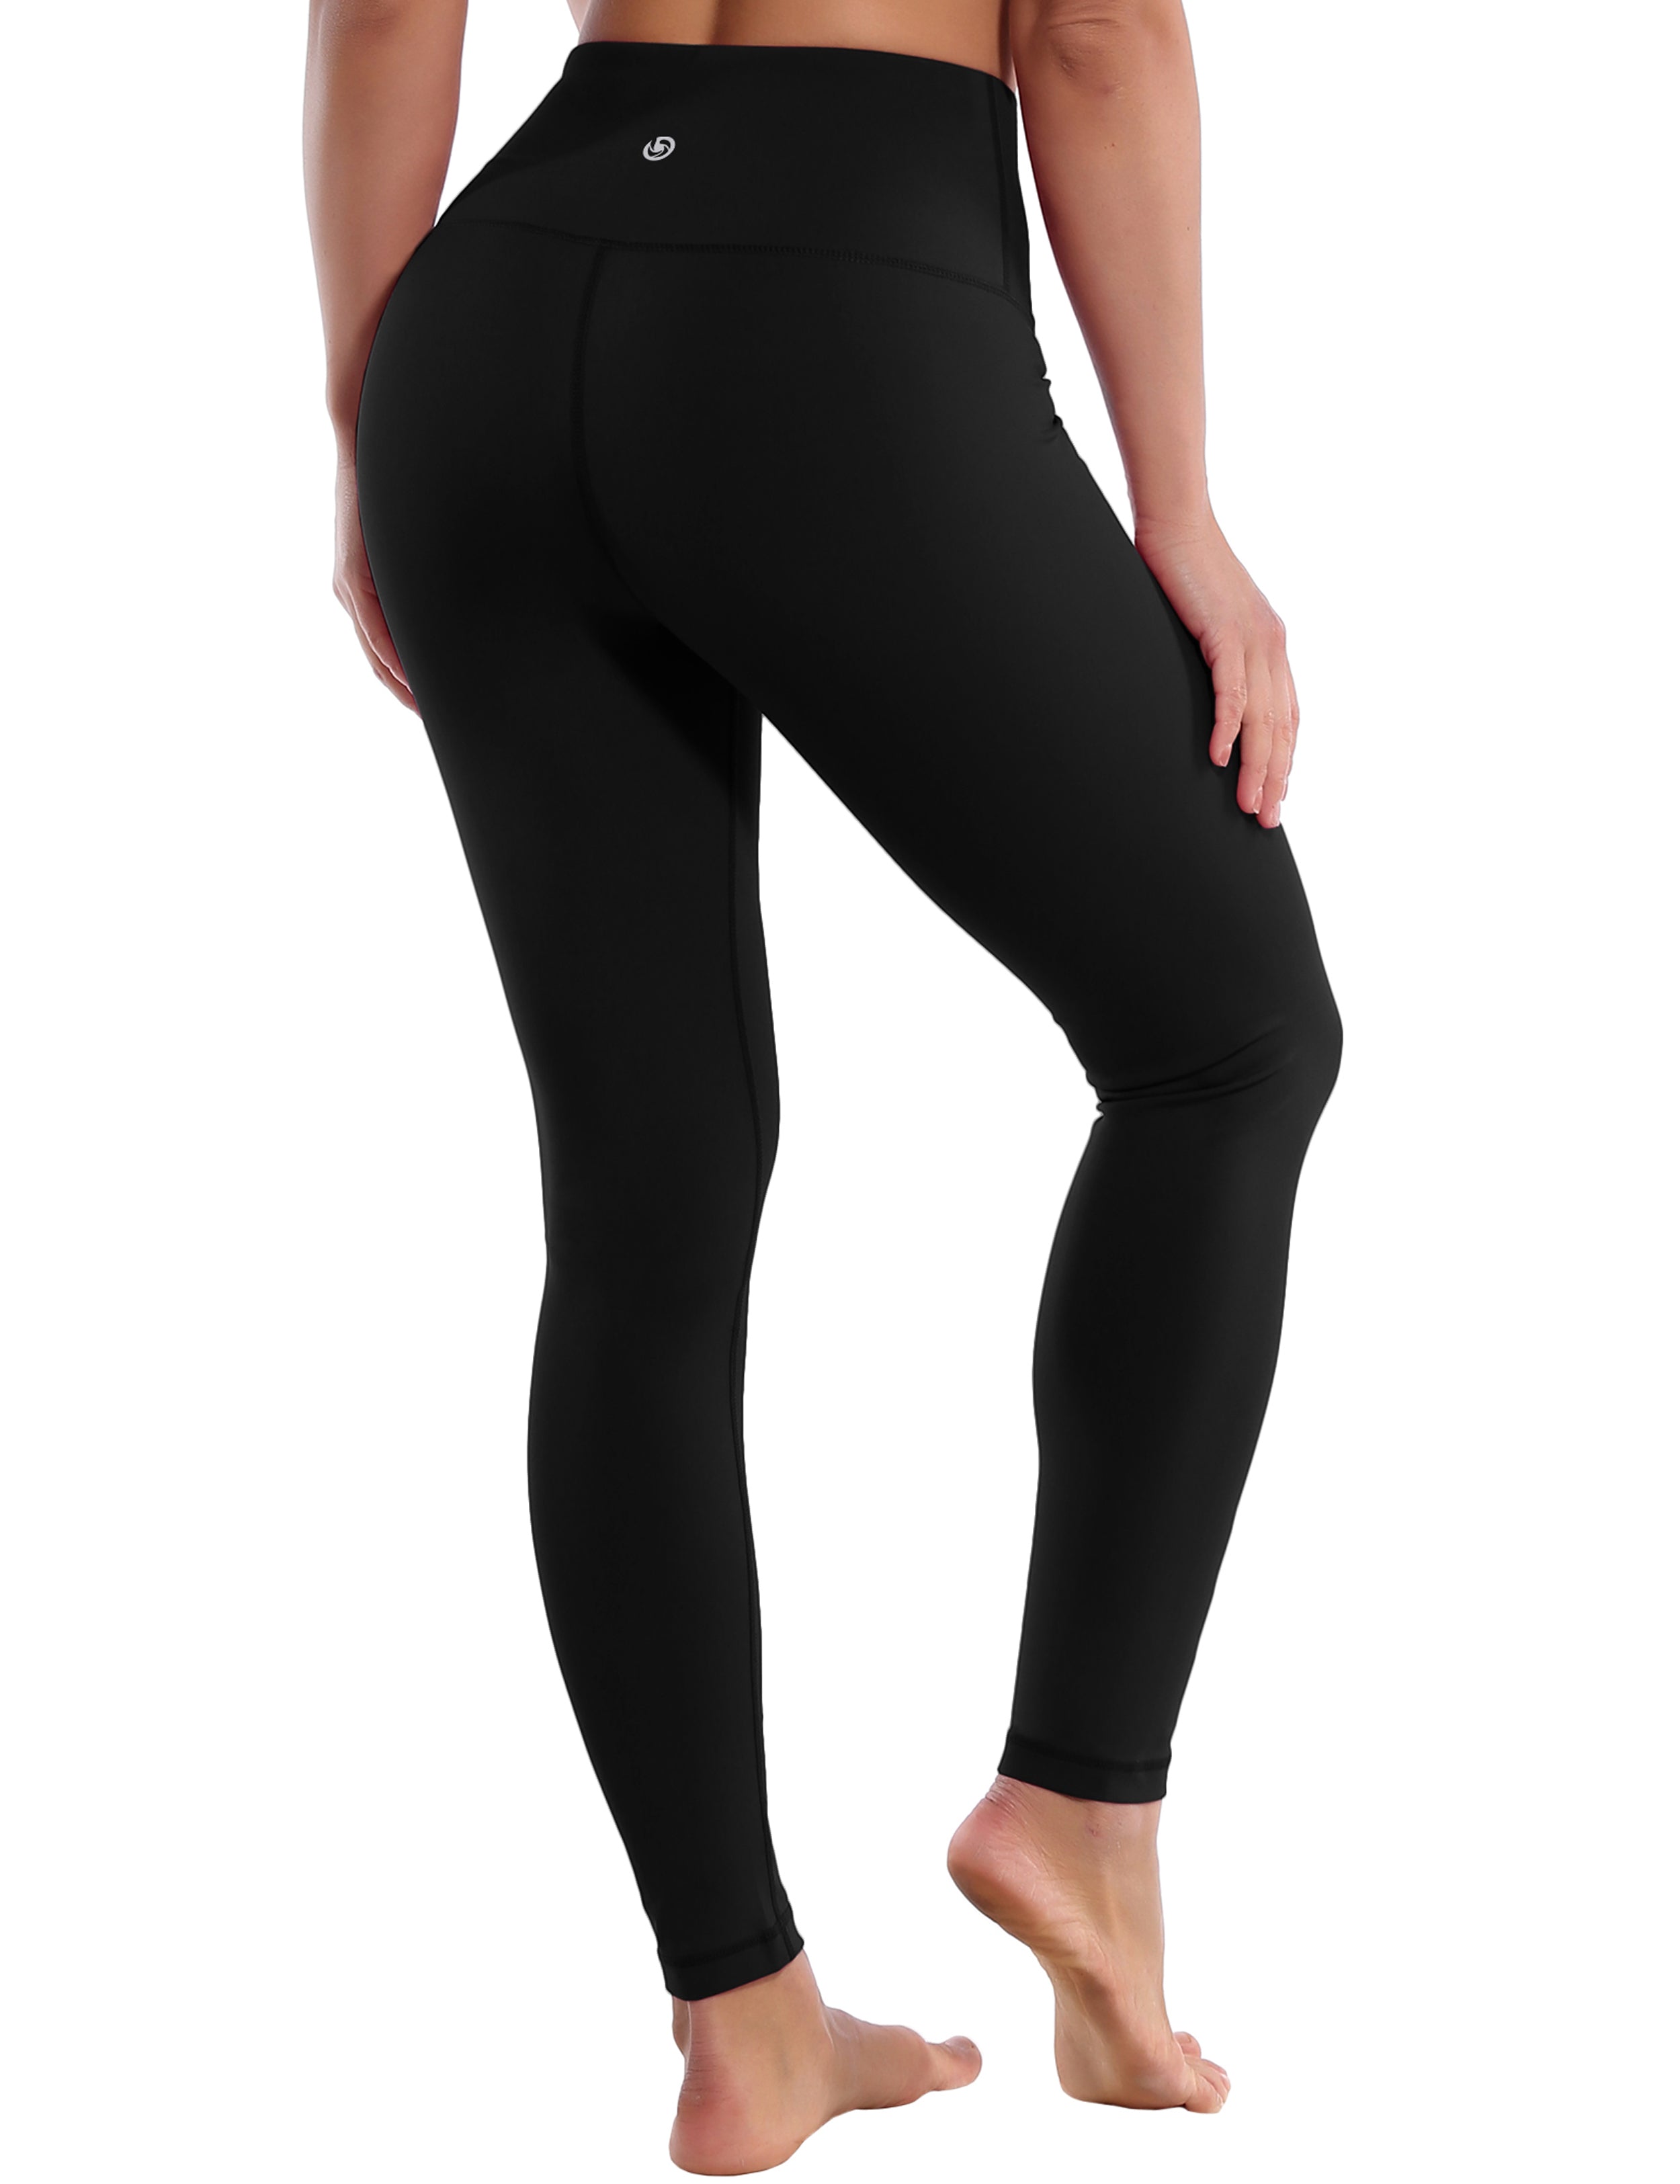 High Waist Yoga Pants black 75%Nylon/25%Spandex Fabric doesn't attract lint easily 4-way stretch No see-through Moisture-wicking Tummy control Inner pocket Four lengths